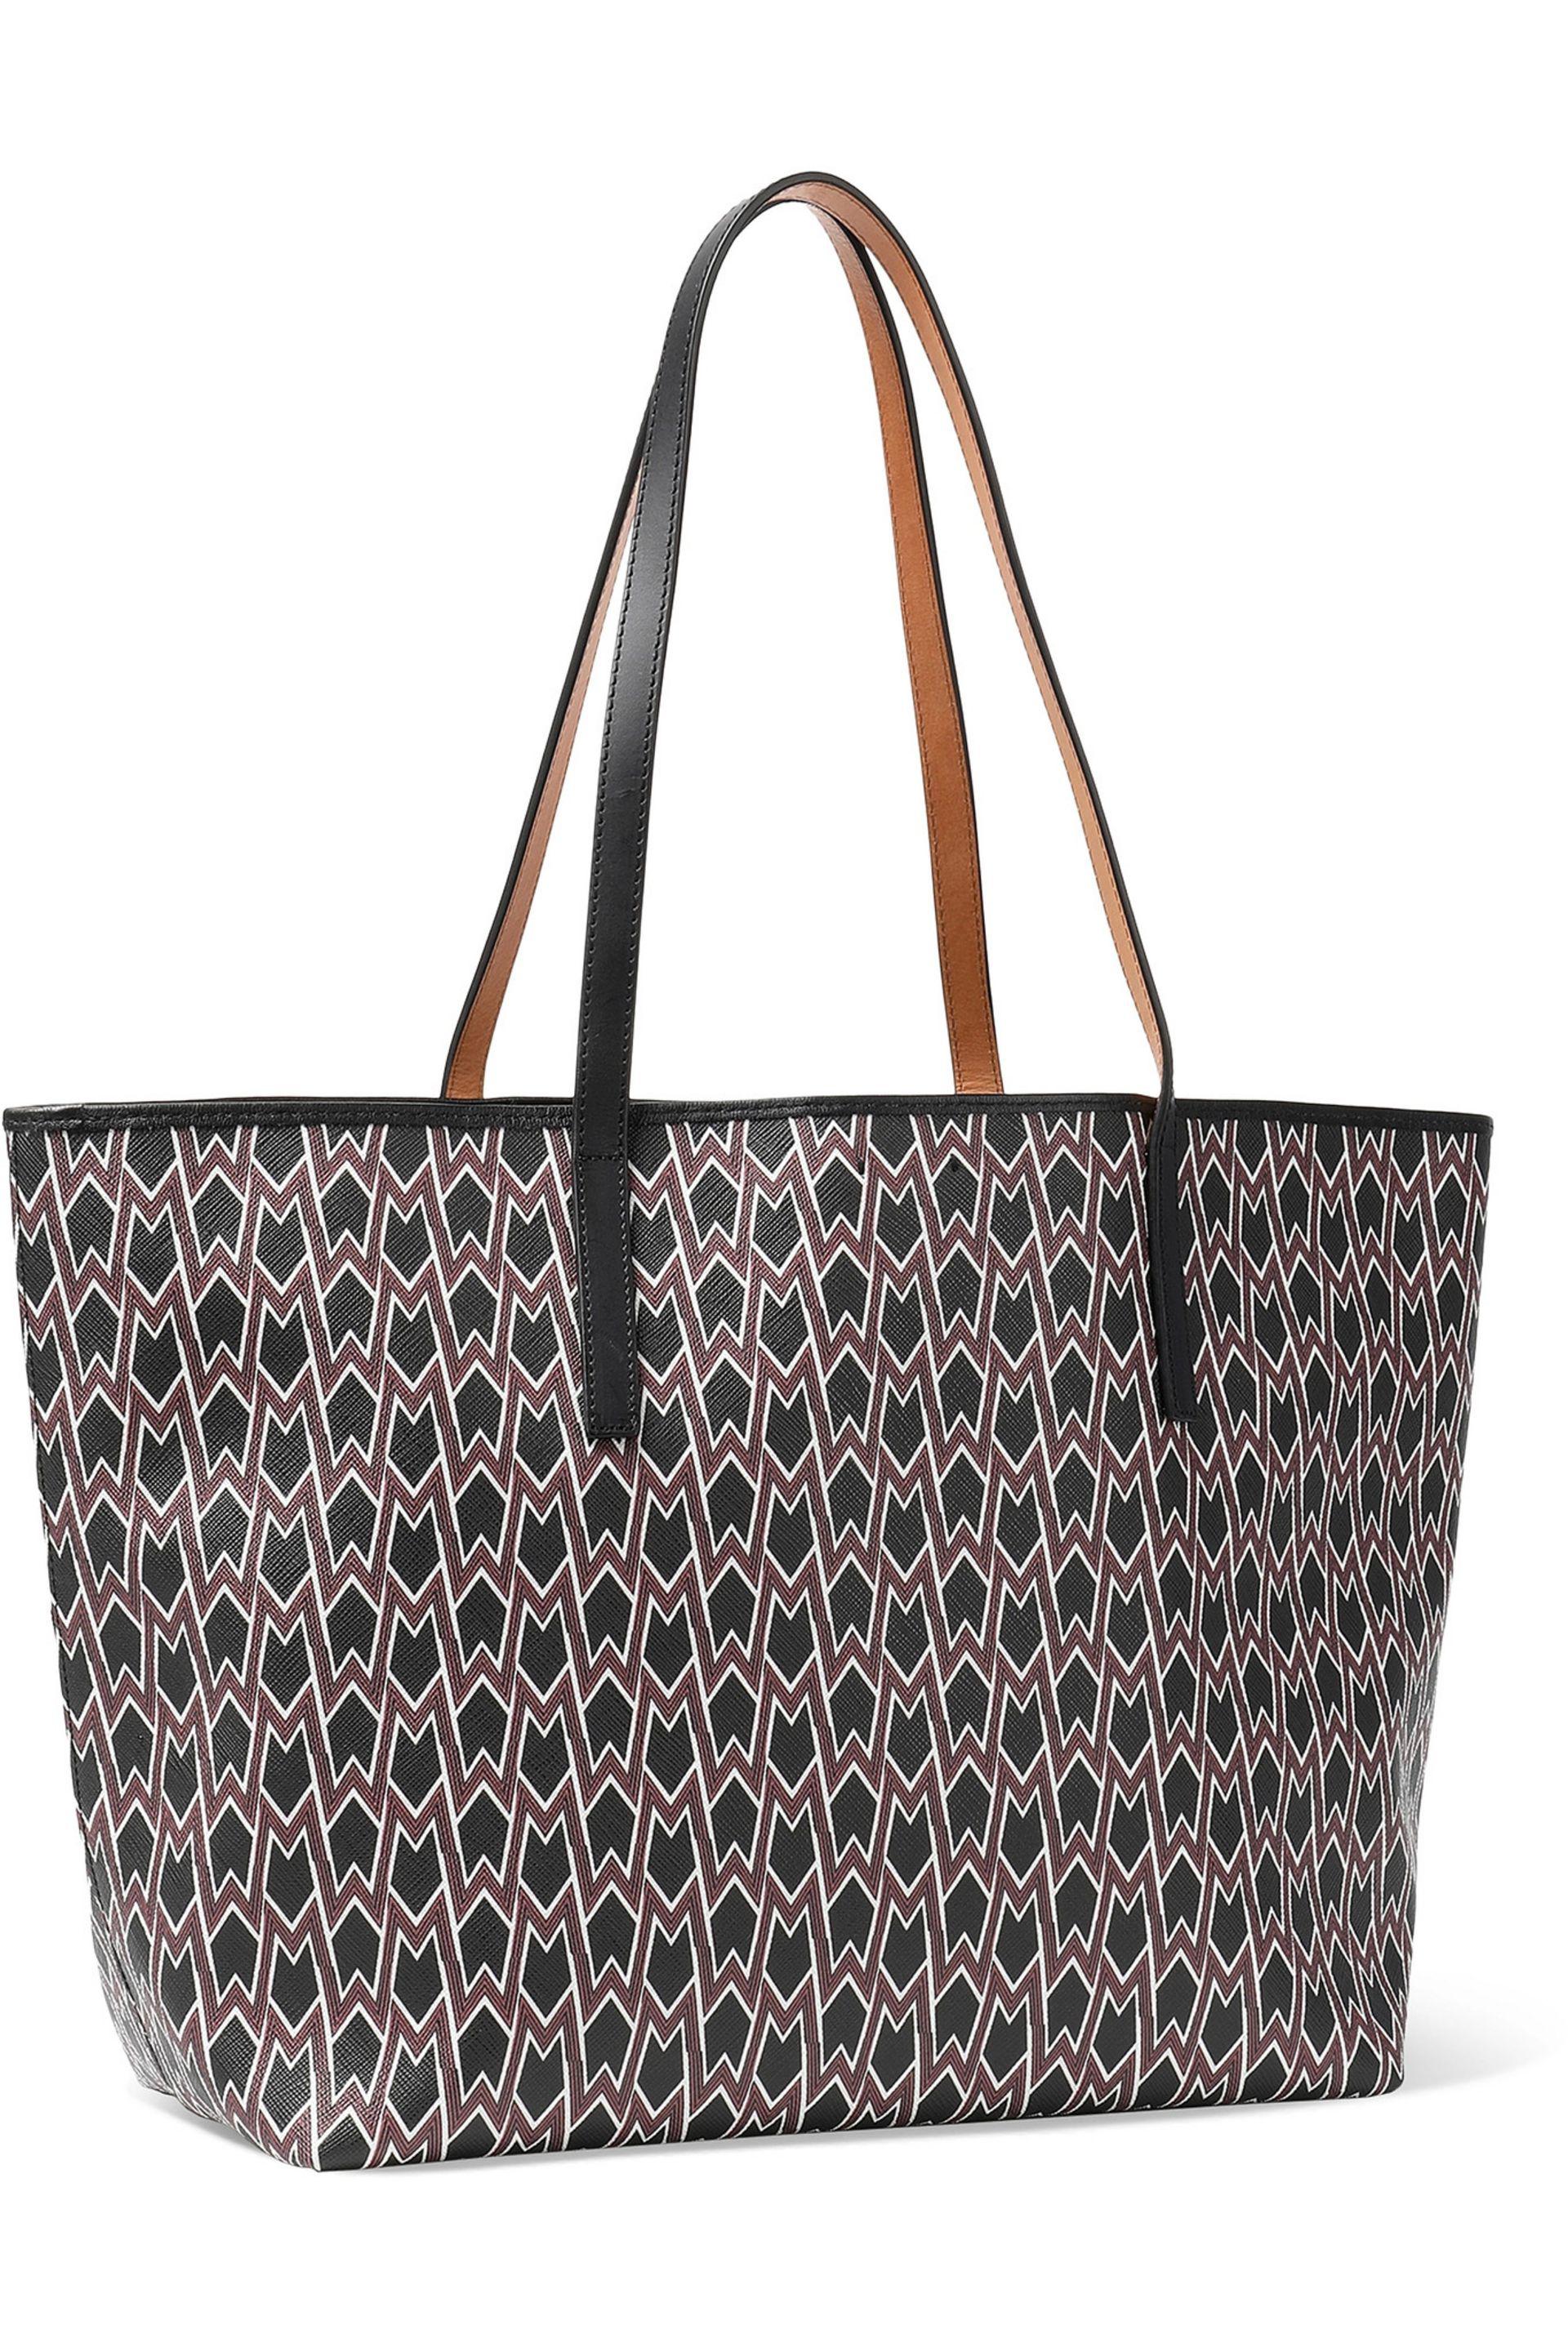 Maje Printed Faux Leather Tote Bag in Burgundy (Black) - Lyst